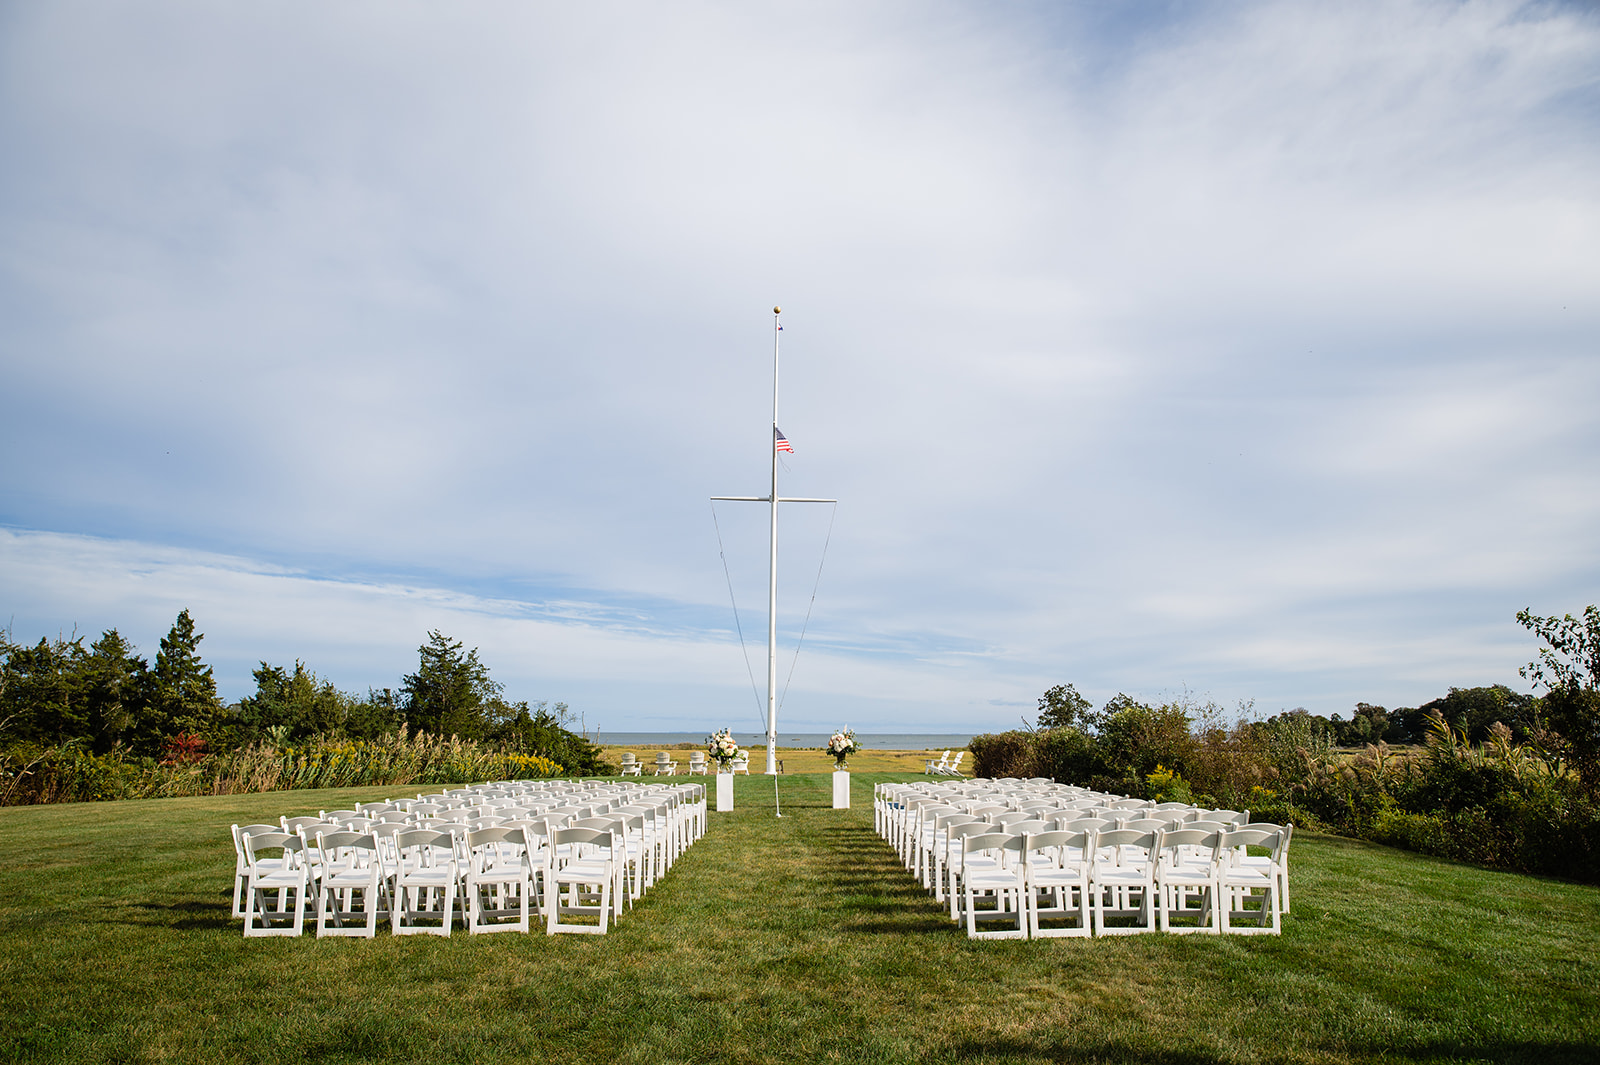 A serene outdoor wedding setup with rows of white chairs facing a flagpole on a lush green lawn, a clear blue sky above, and the ocean in the distance.